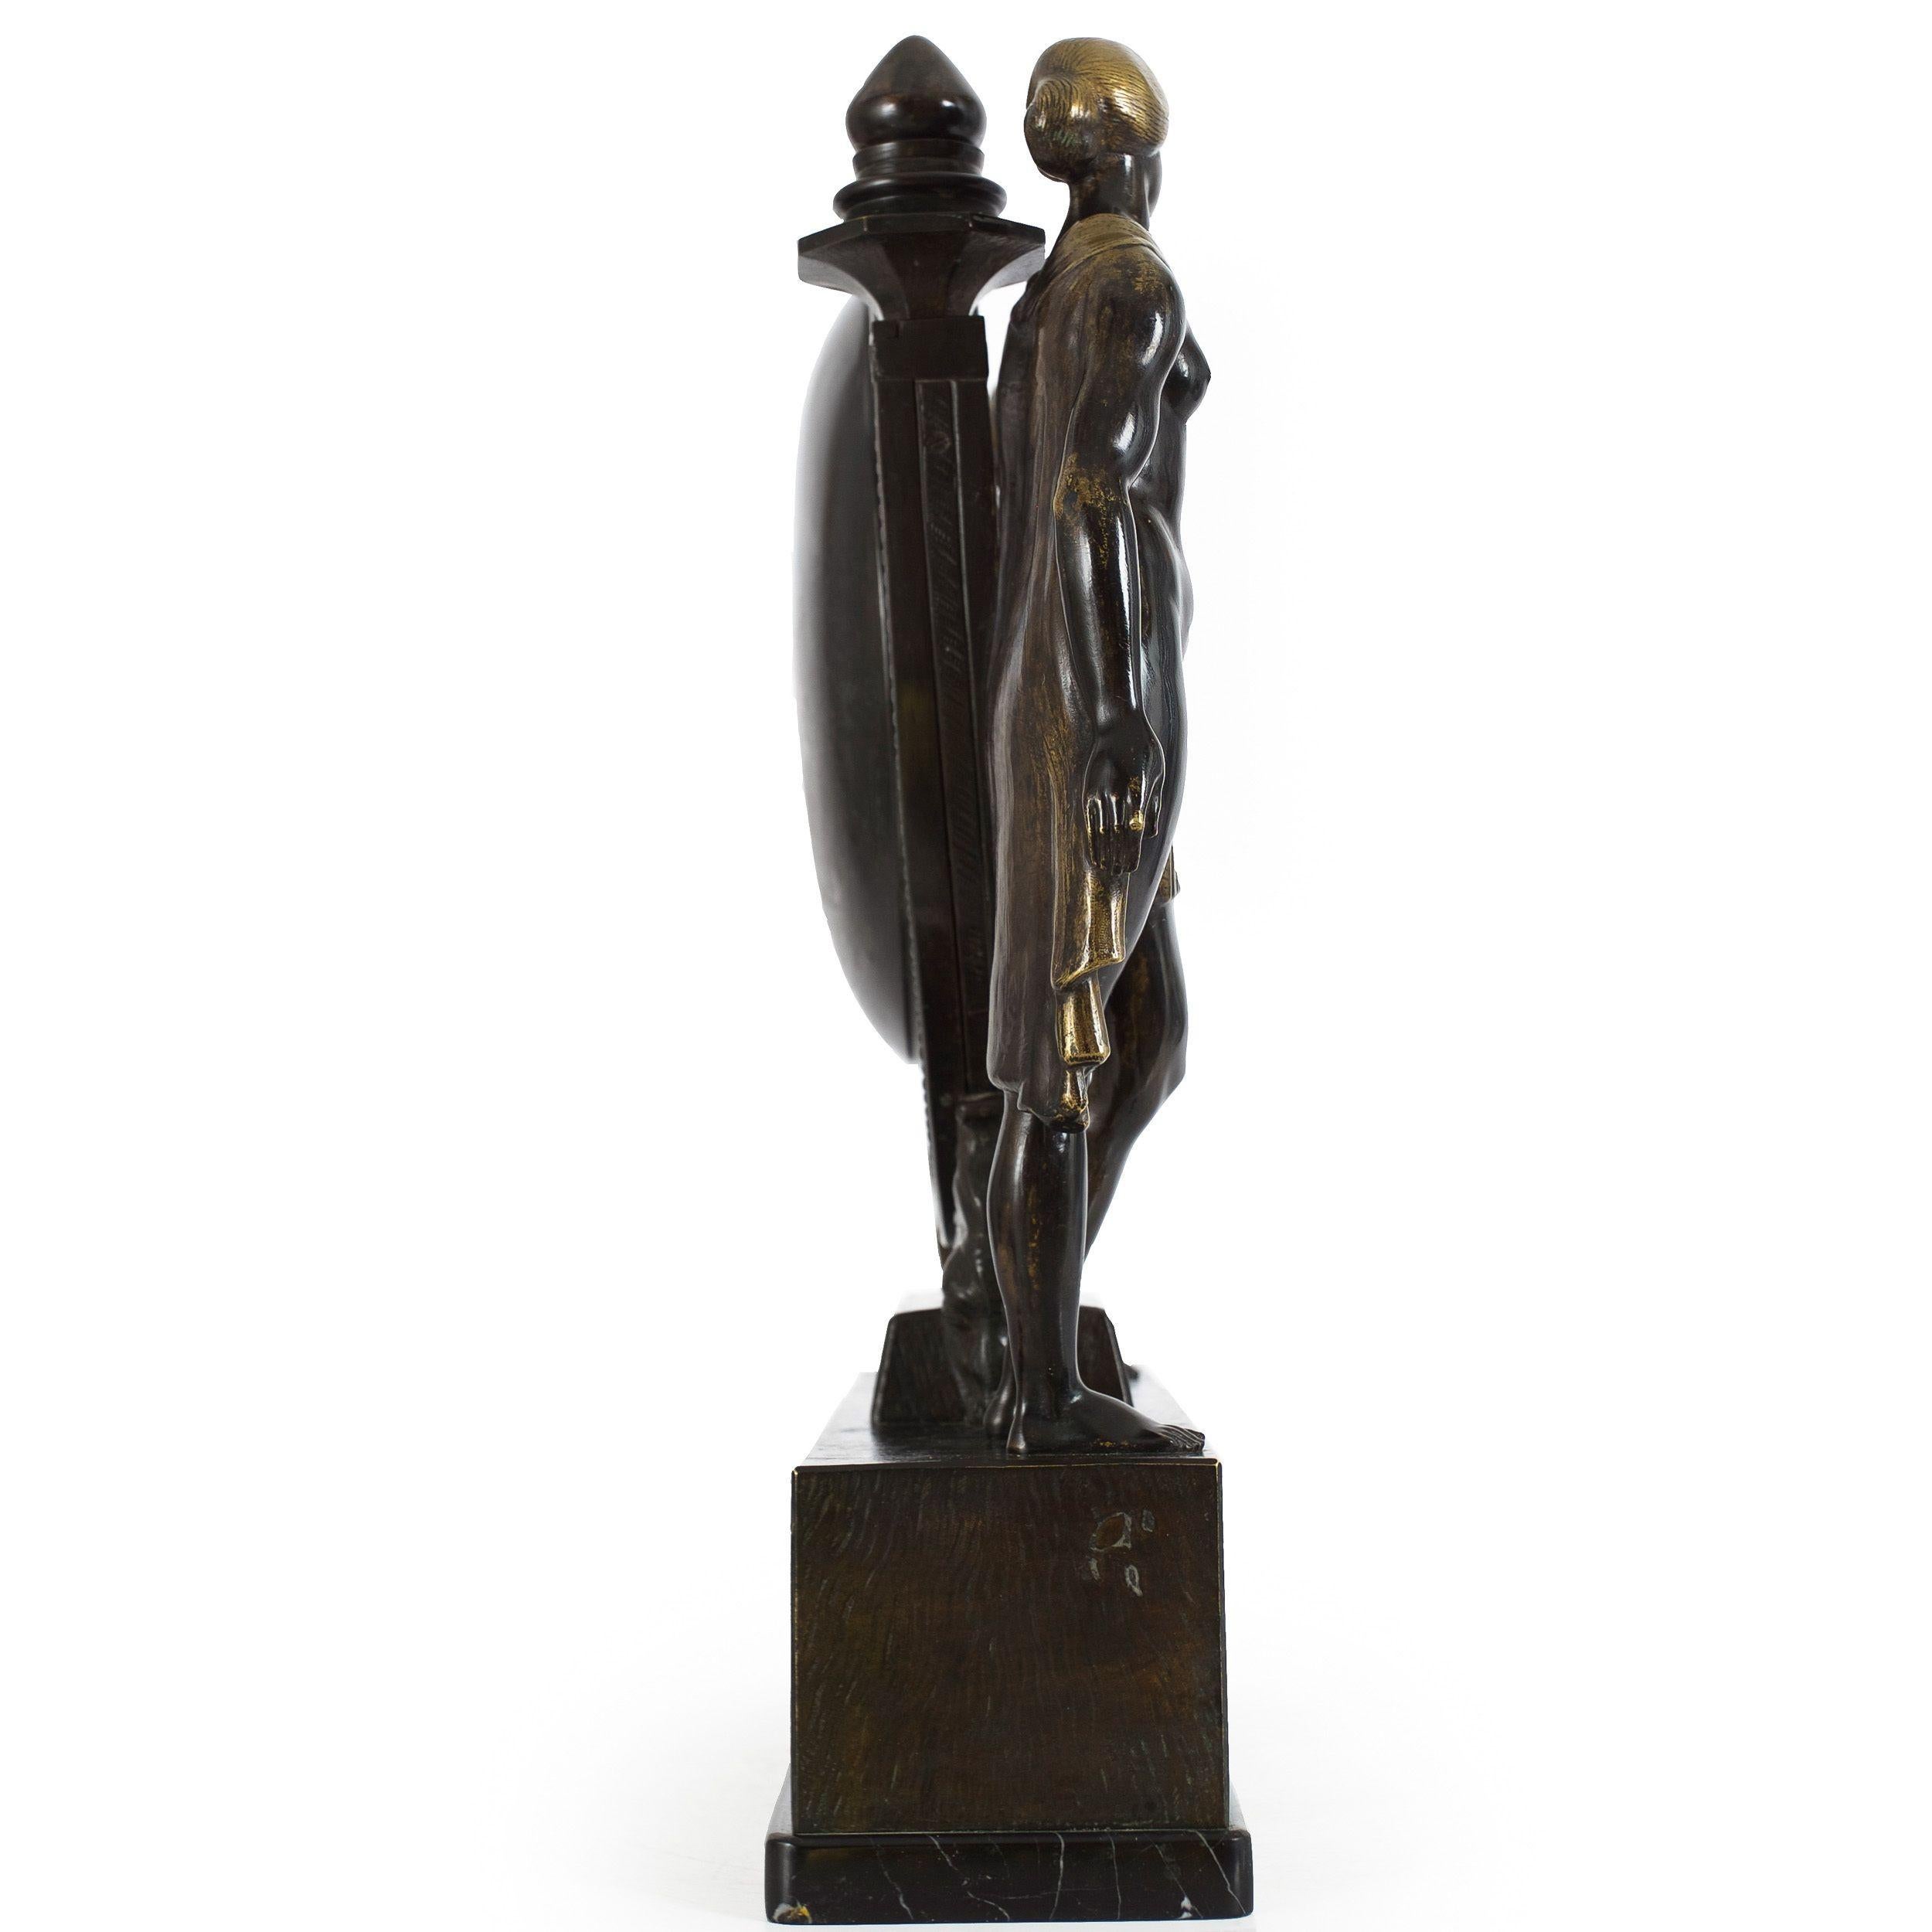 ART DECO FIGURAL MANTEL CLOCK
Anton Grath (Austrian, b. 1881)  patinated and burnished bronze over marble  signed 